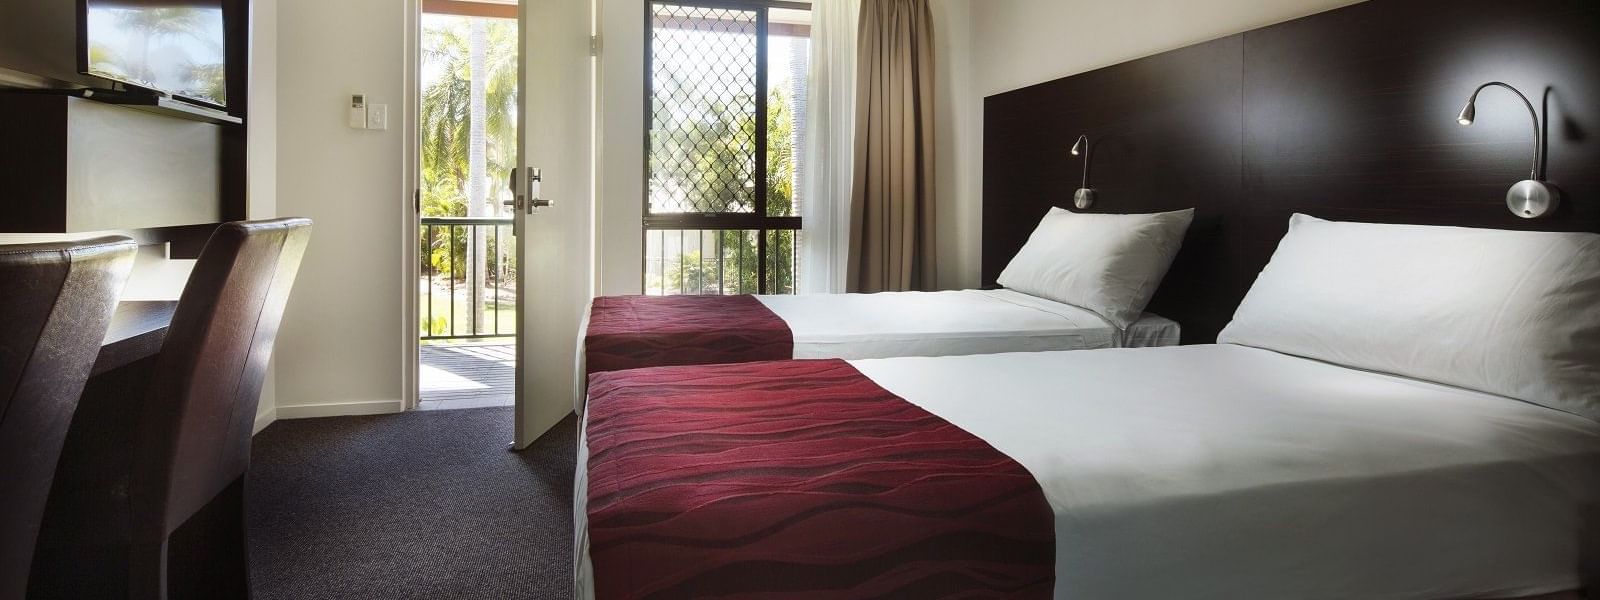 Comfortbale room at Mercure Hotel Townsville 